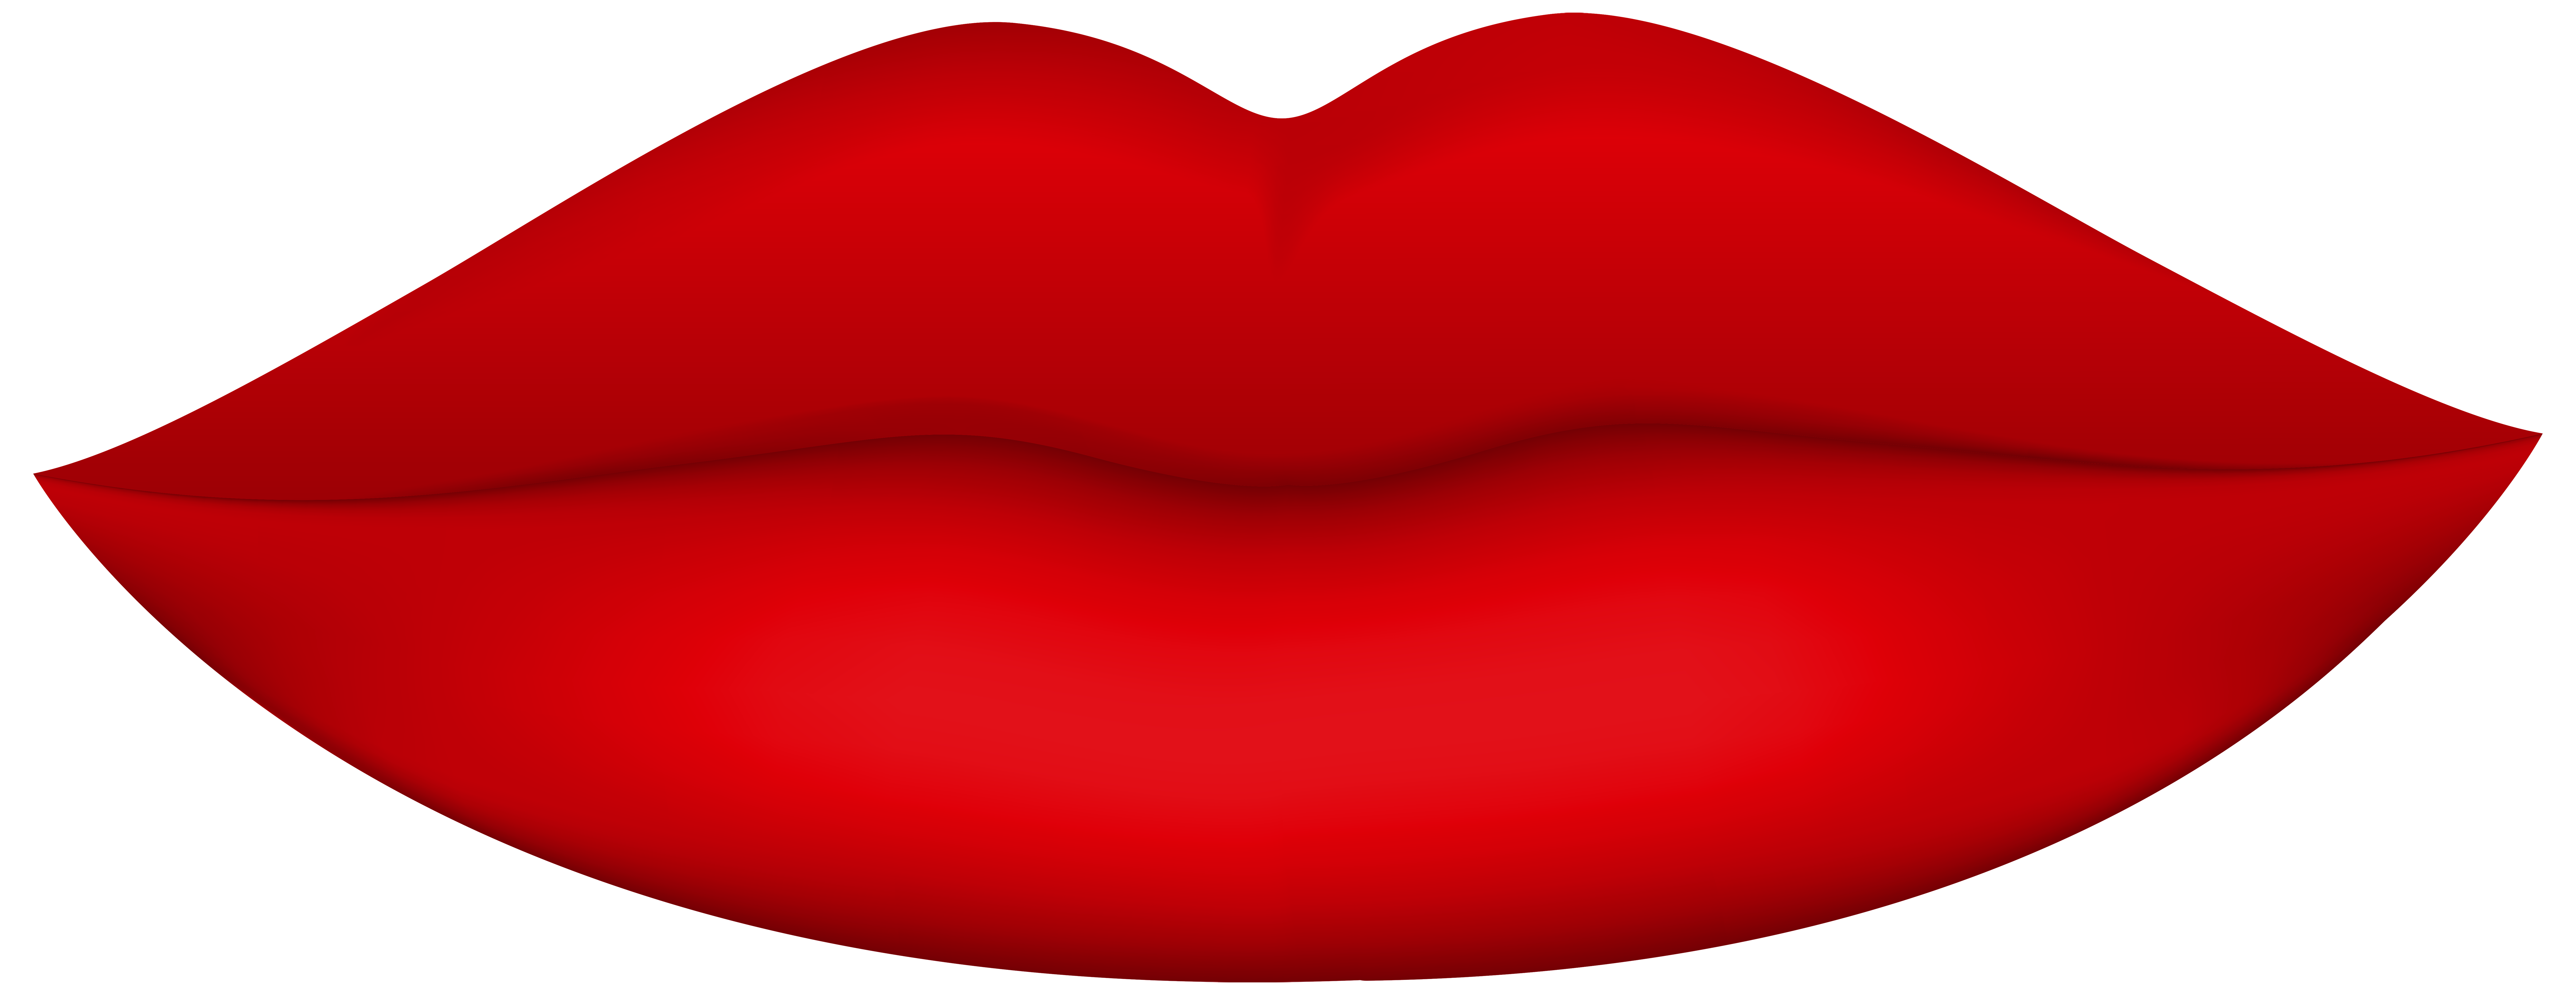 Picture Of Red Lips